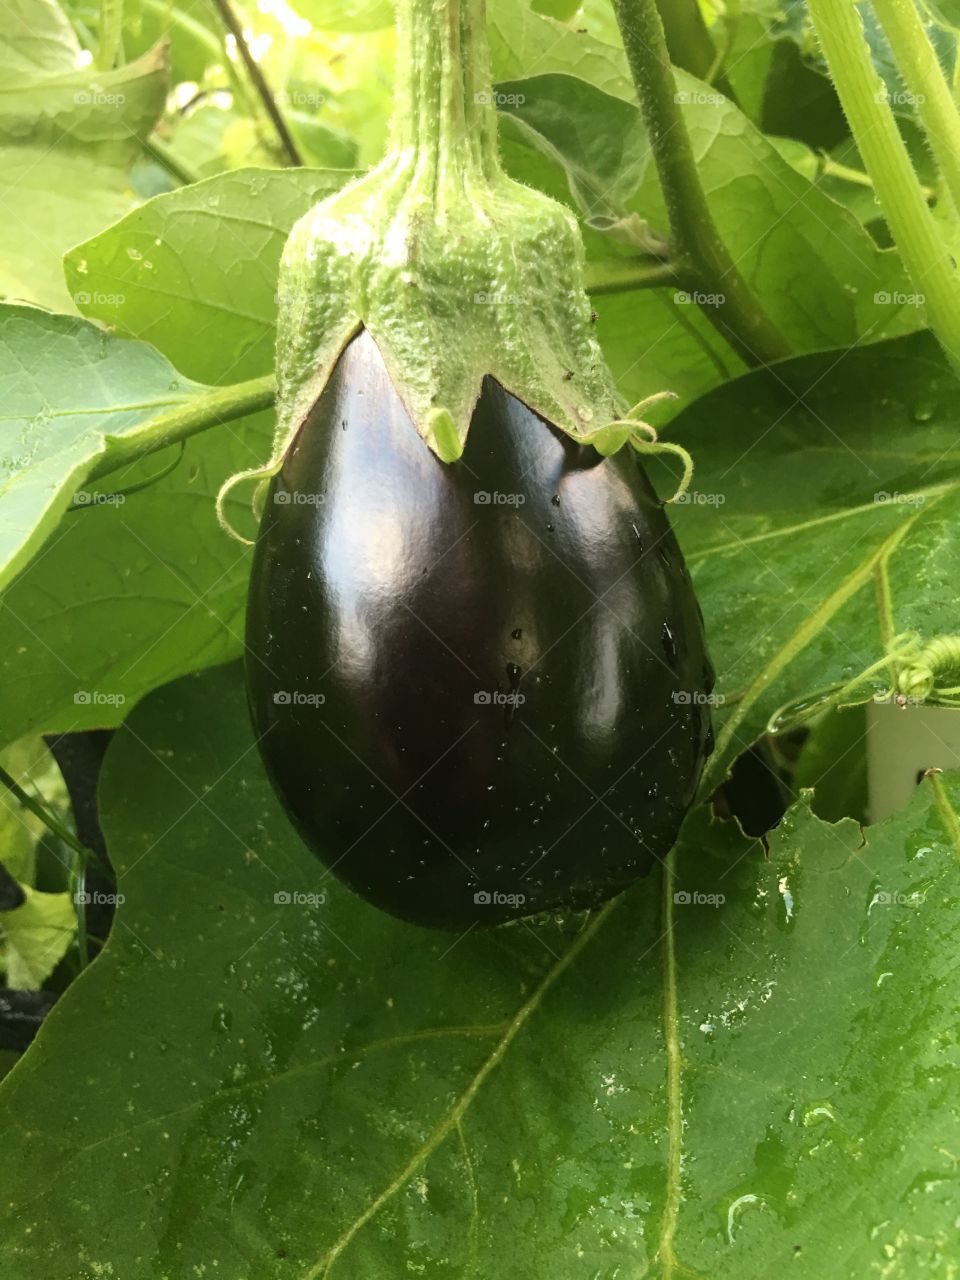 Organic beautiful purple eggplant growing almost ready for picking 